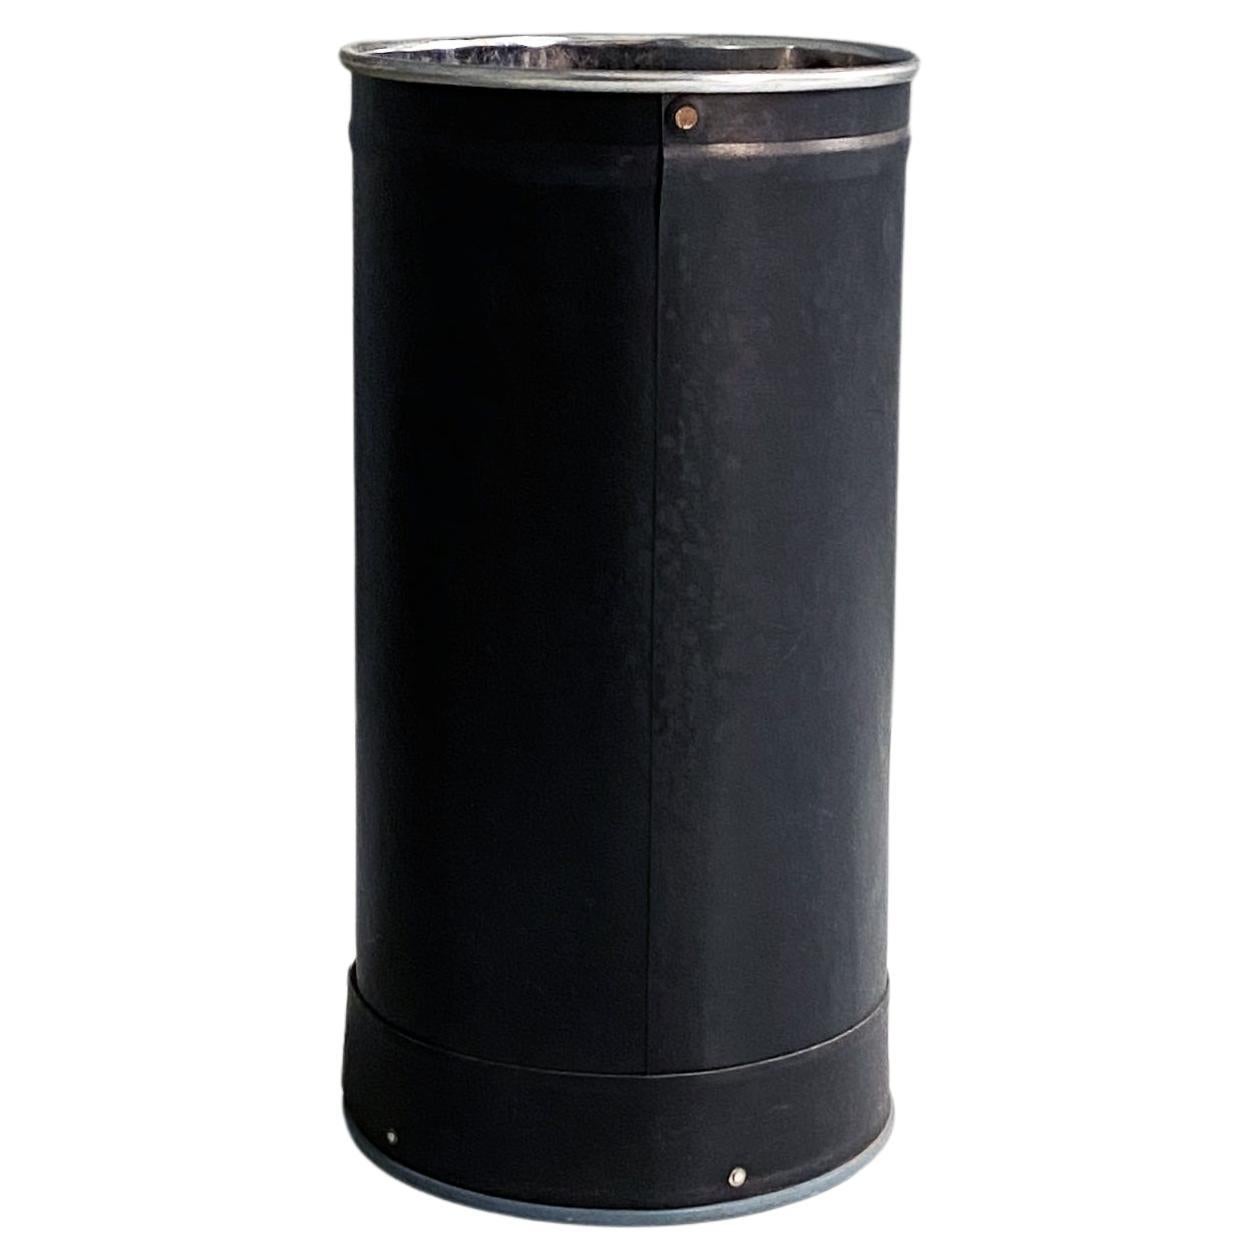 Mid-Century Modern Industrial Black Plastic and Metal Bin by Victor, 1960s For Sale